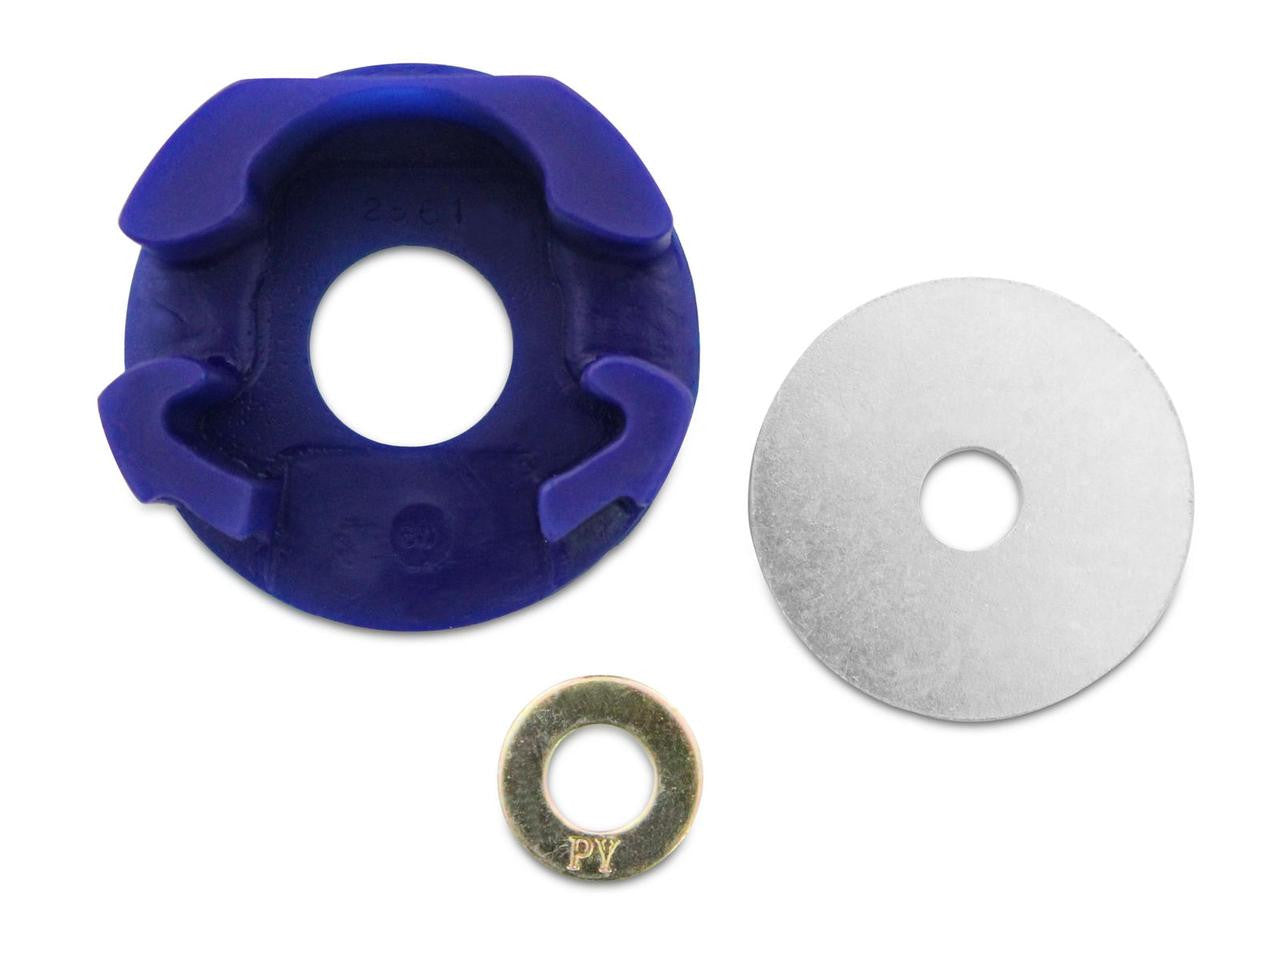 Superpro Front Torque Arm Lower Insert Bush Kit: Competition and Race Use - Up to Mid-2008 Models - Leon MK2